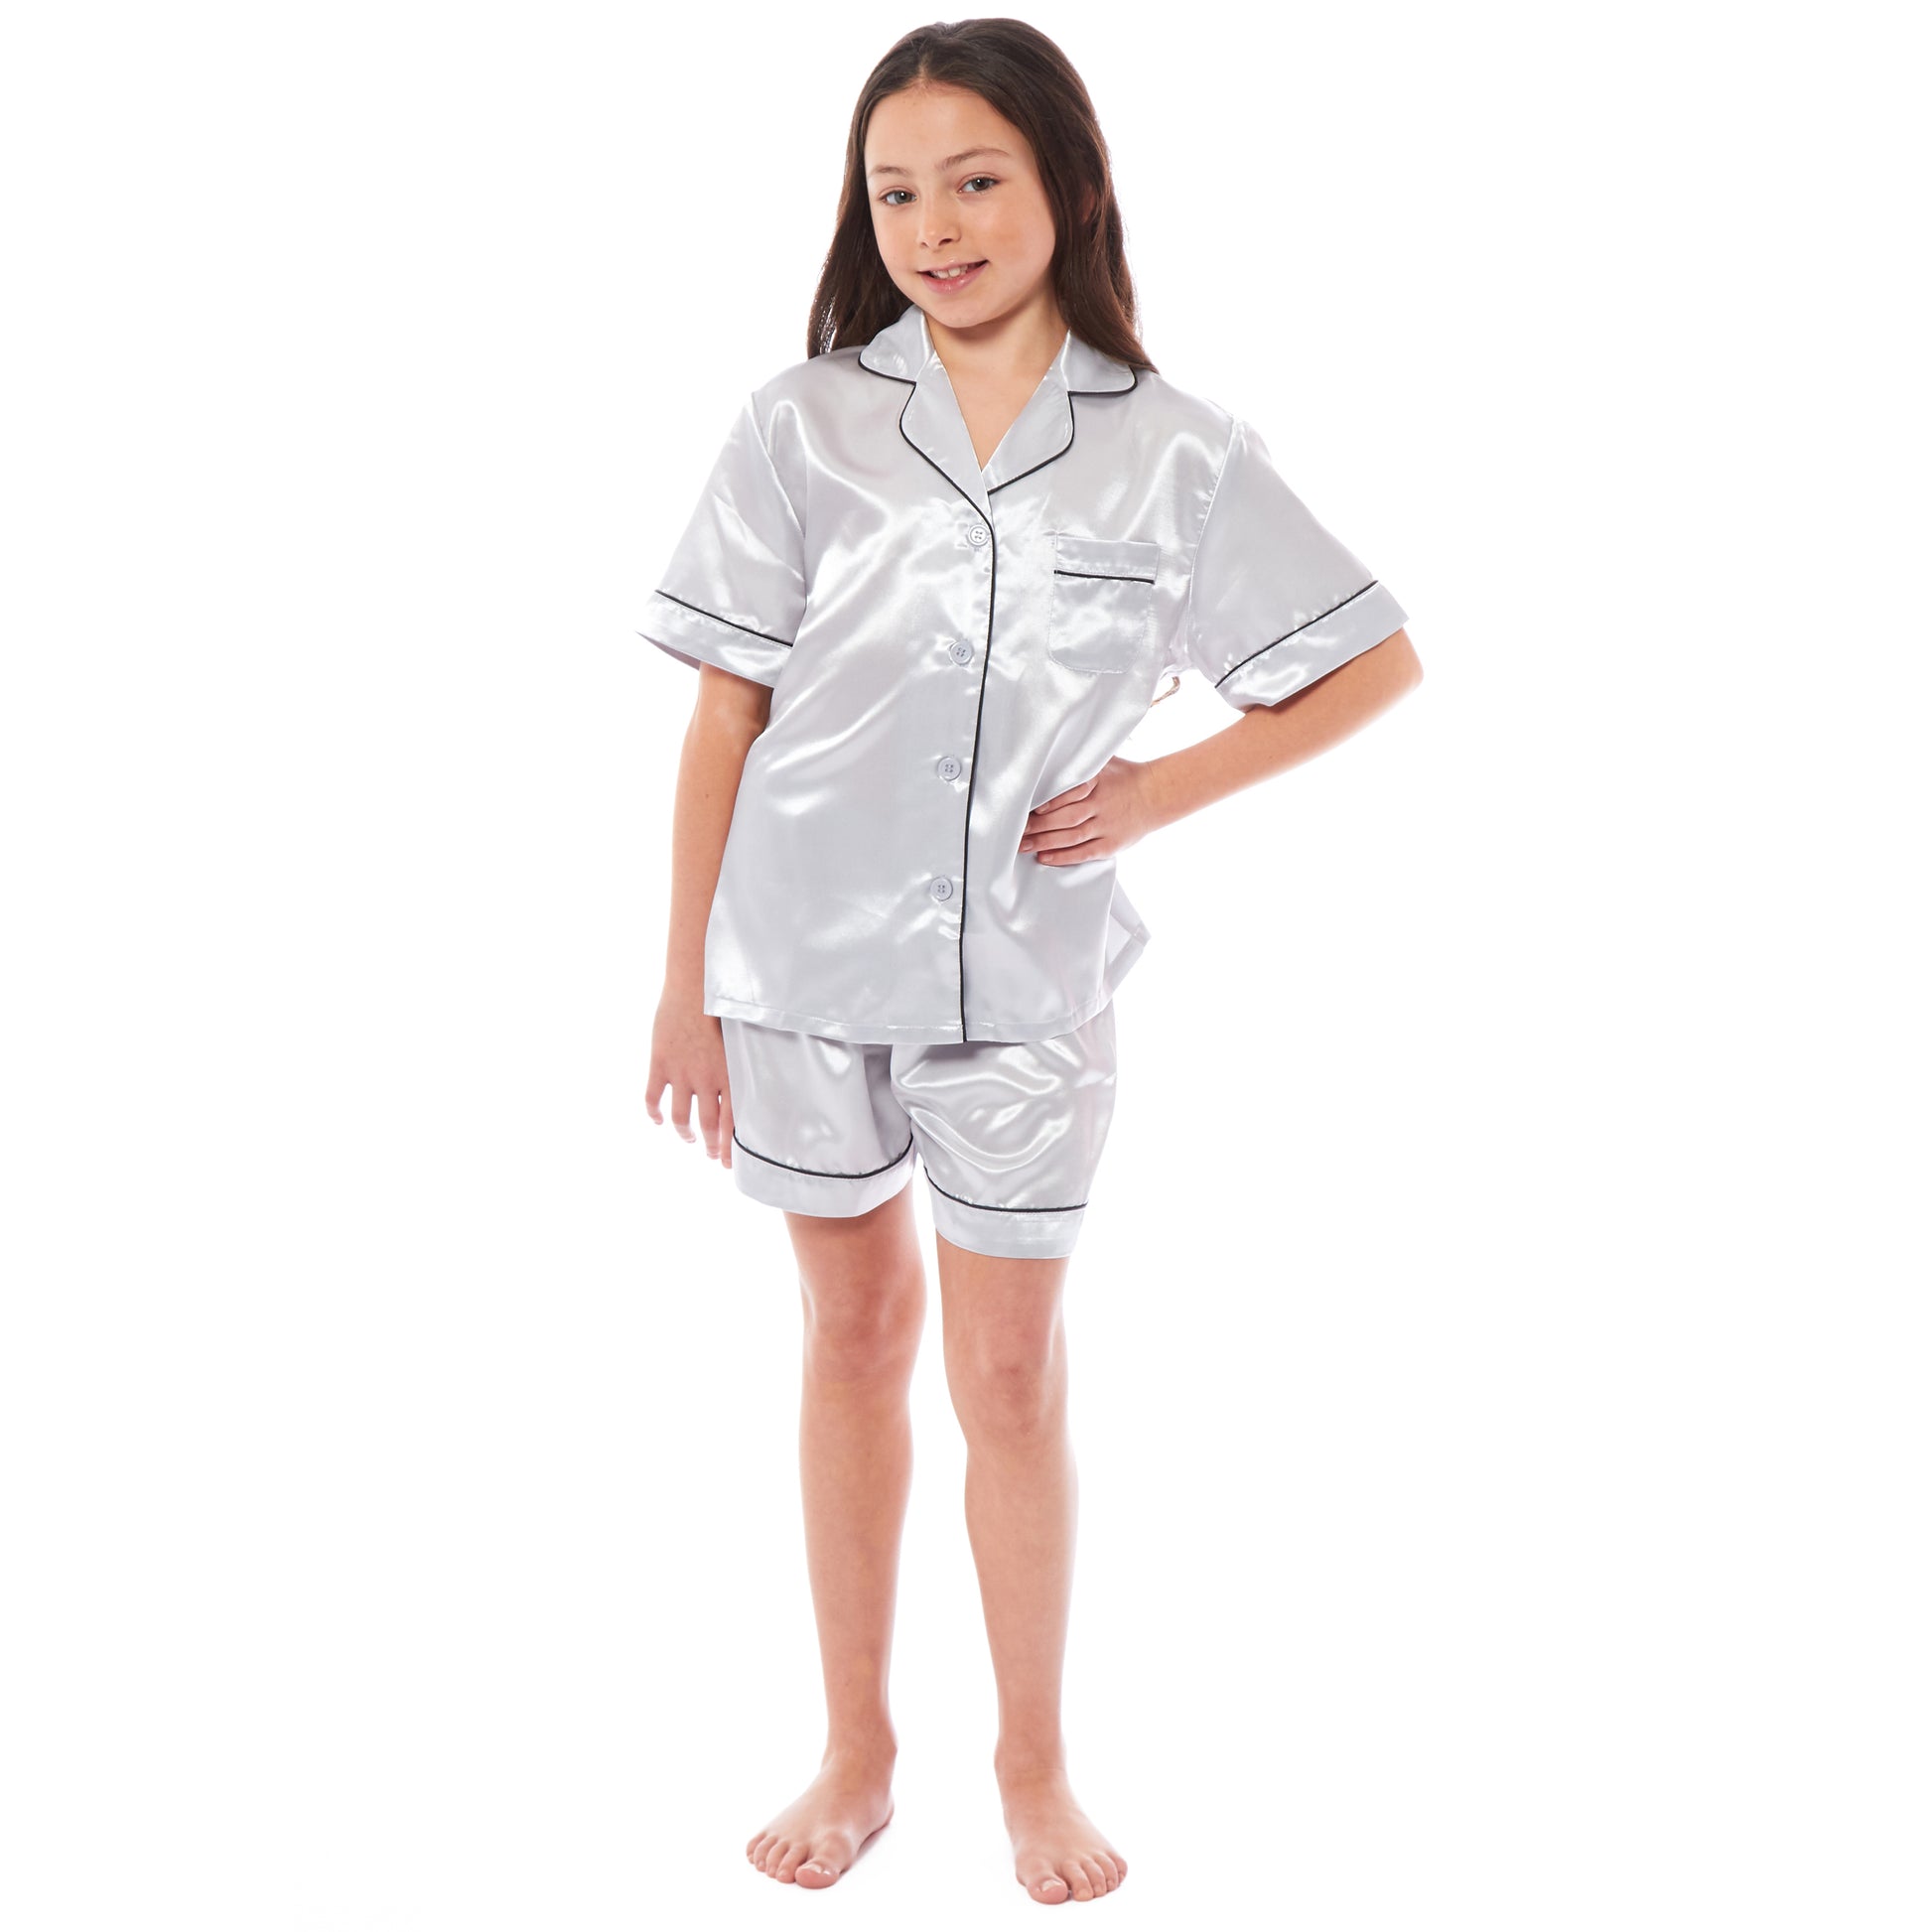 Kids Satin Silk Pyjama Set for Girls with Button-Down Shirt and Loose-Fitting Pants Comfortable Loungewear in Black Pink Grey Ages 5-14 by Daisy Dreamer. Buy now for £12.00. A Pyjamas by Daisy Dreamer. 11-12,13-14,5-6,7-8,9-10,_Hi_chtgptapp_optimised_this